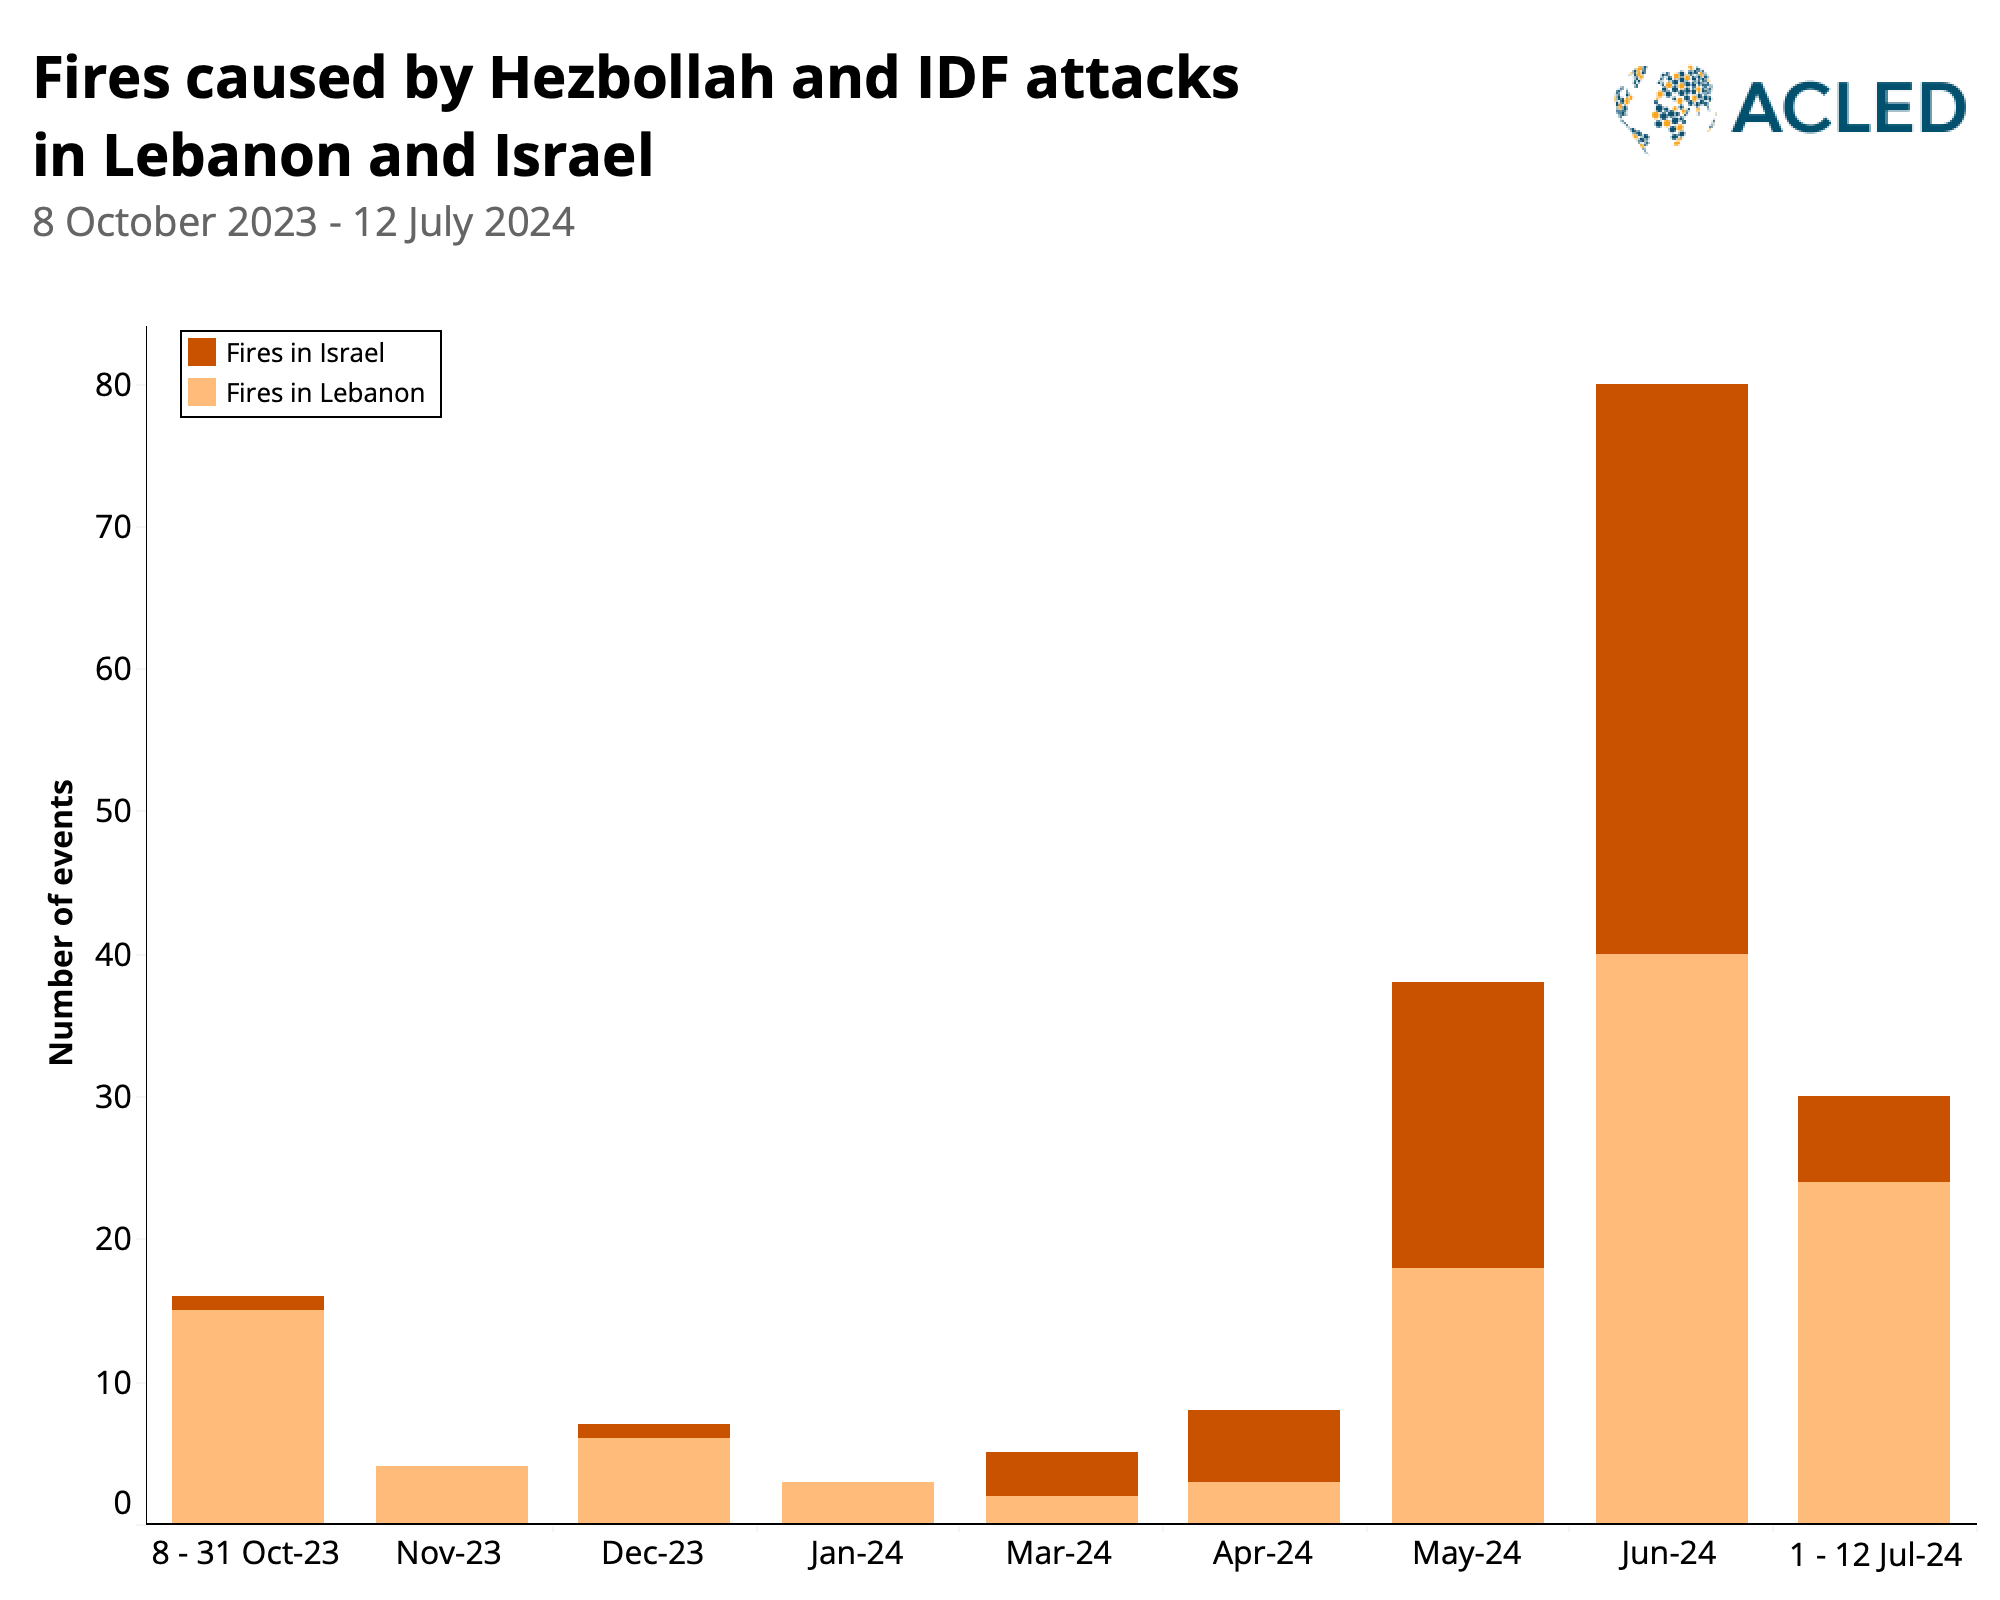 Bar graph - Fires caused by Hezbollah and IDF attacks in Lebanon and Israel - 8 October 2023 - 12 July 2024